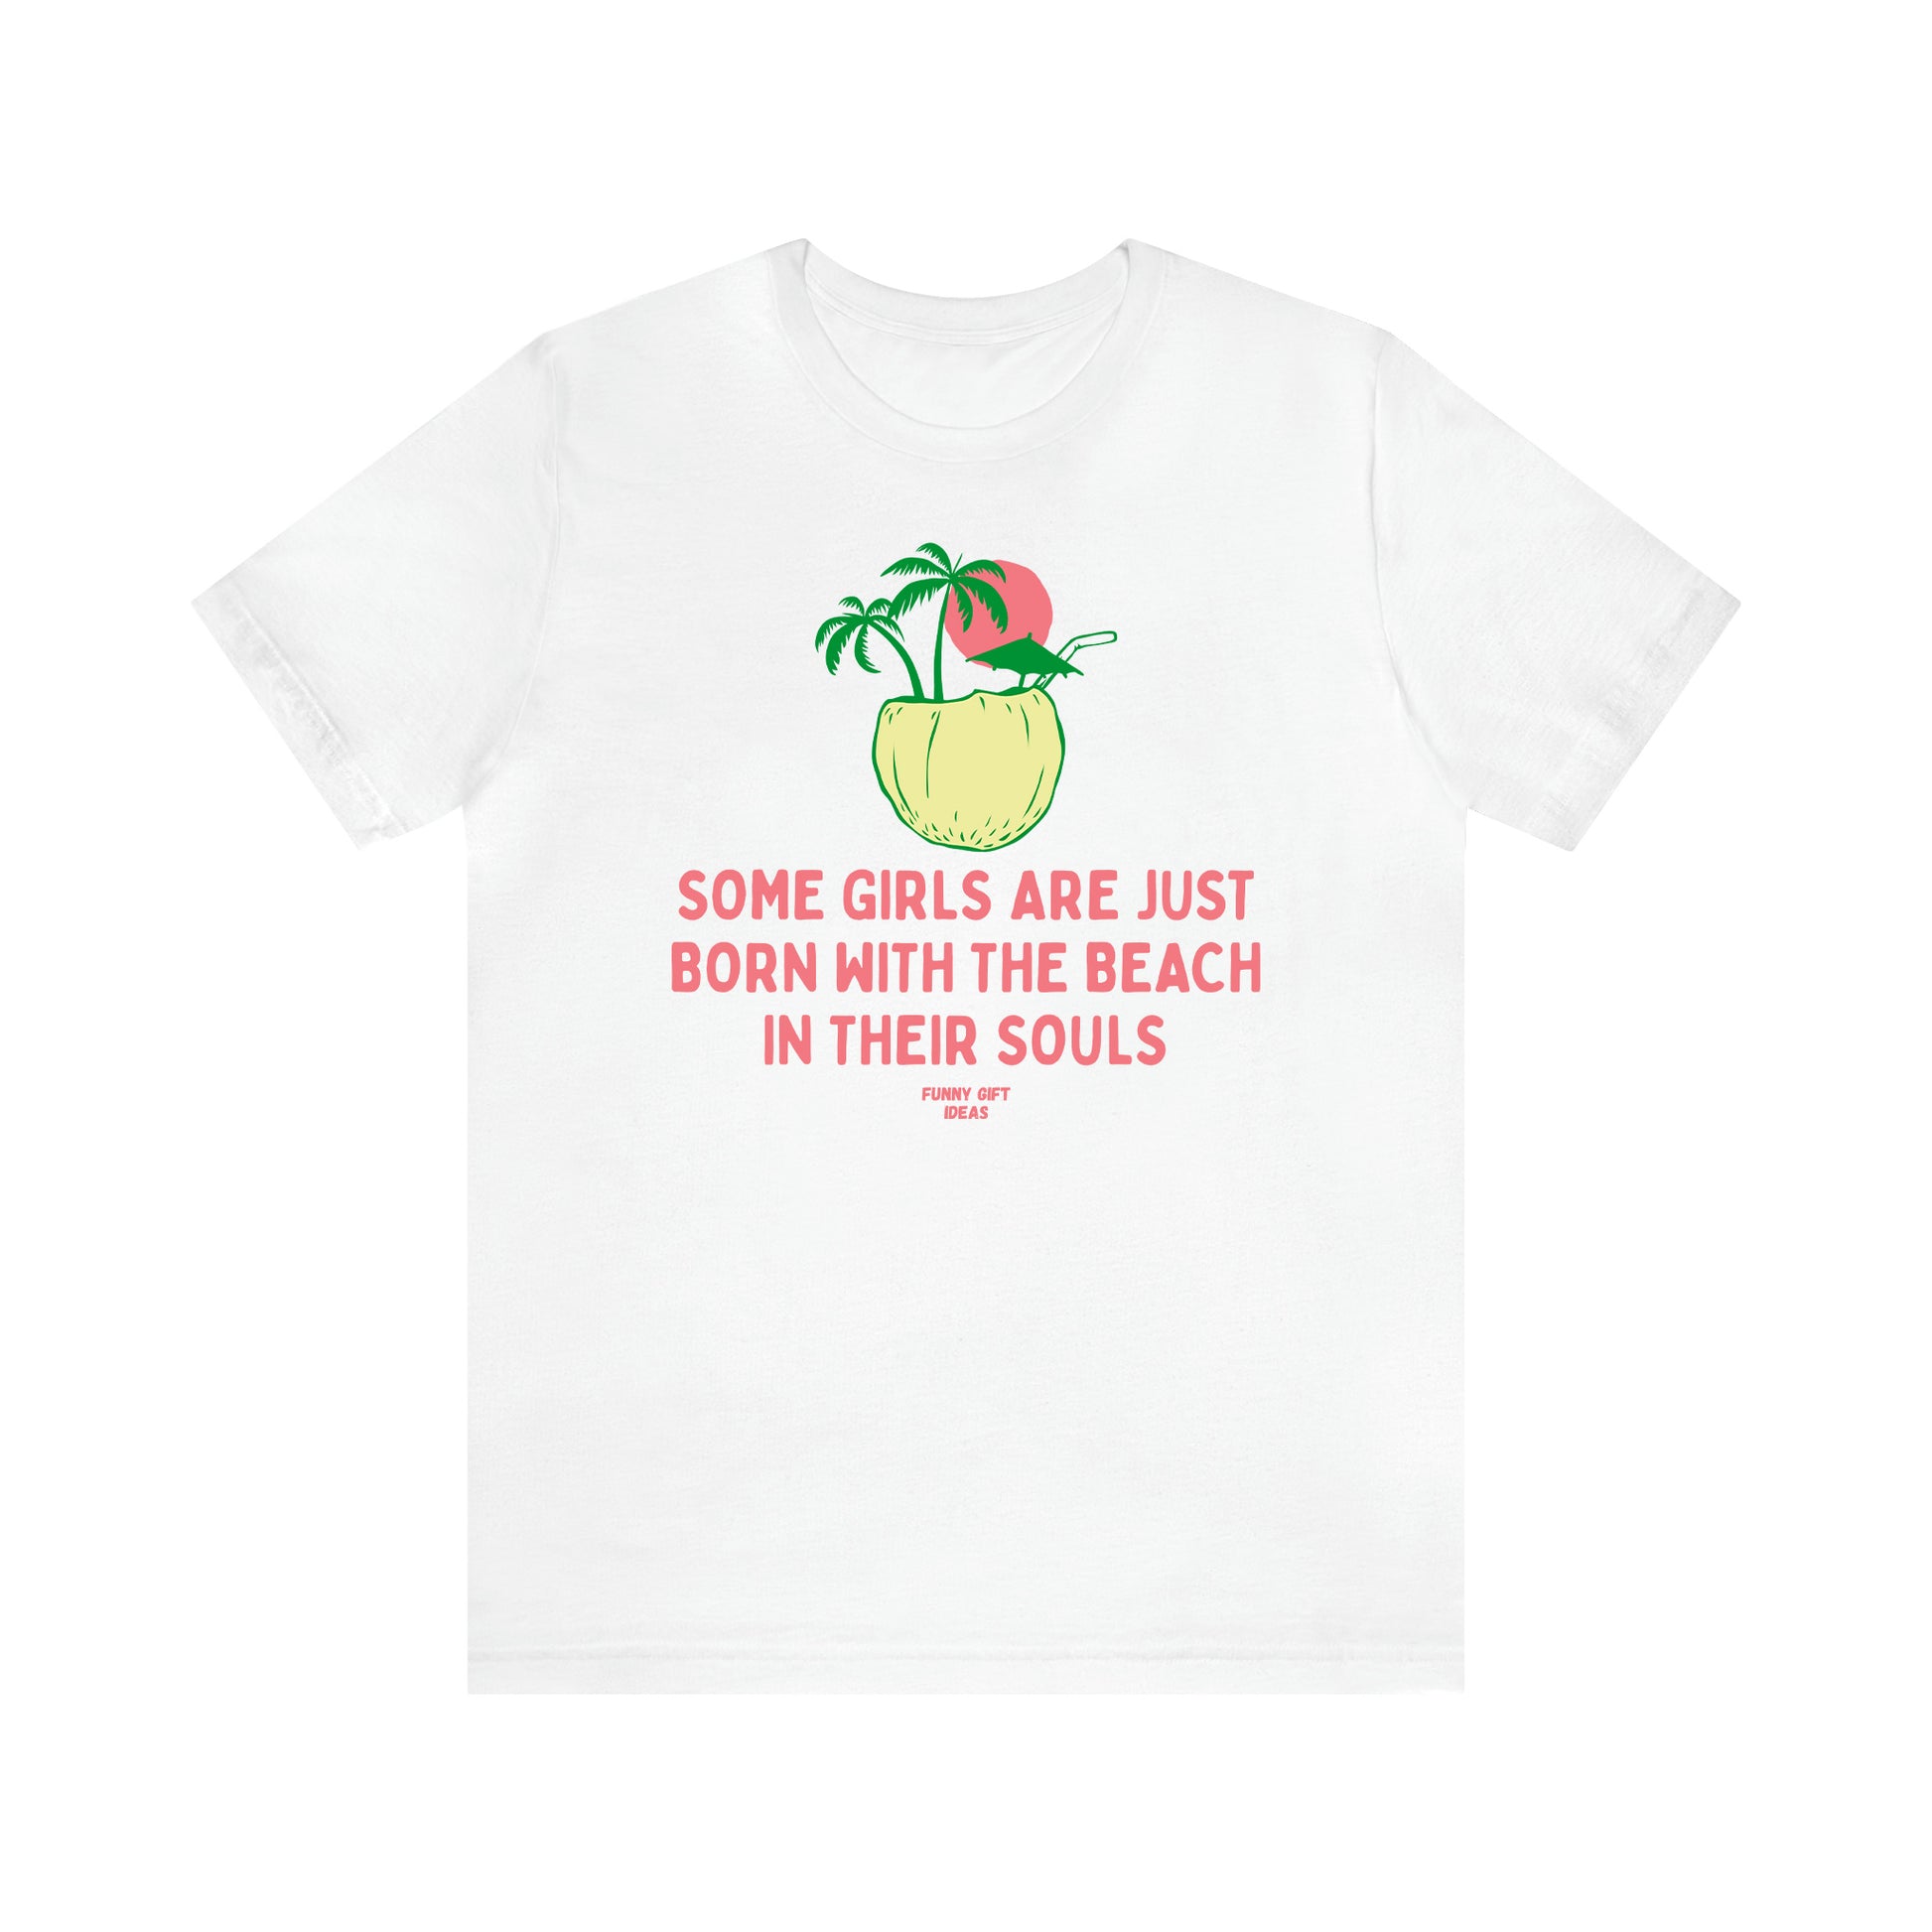 Women's T Shirts Some Girls Are Just Born With the Beach in Their Souls - Funny Gift Ideas